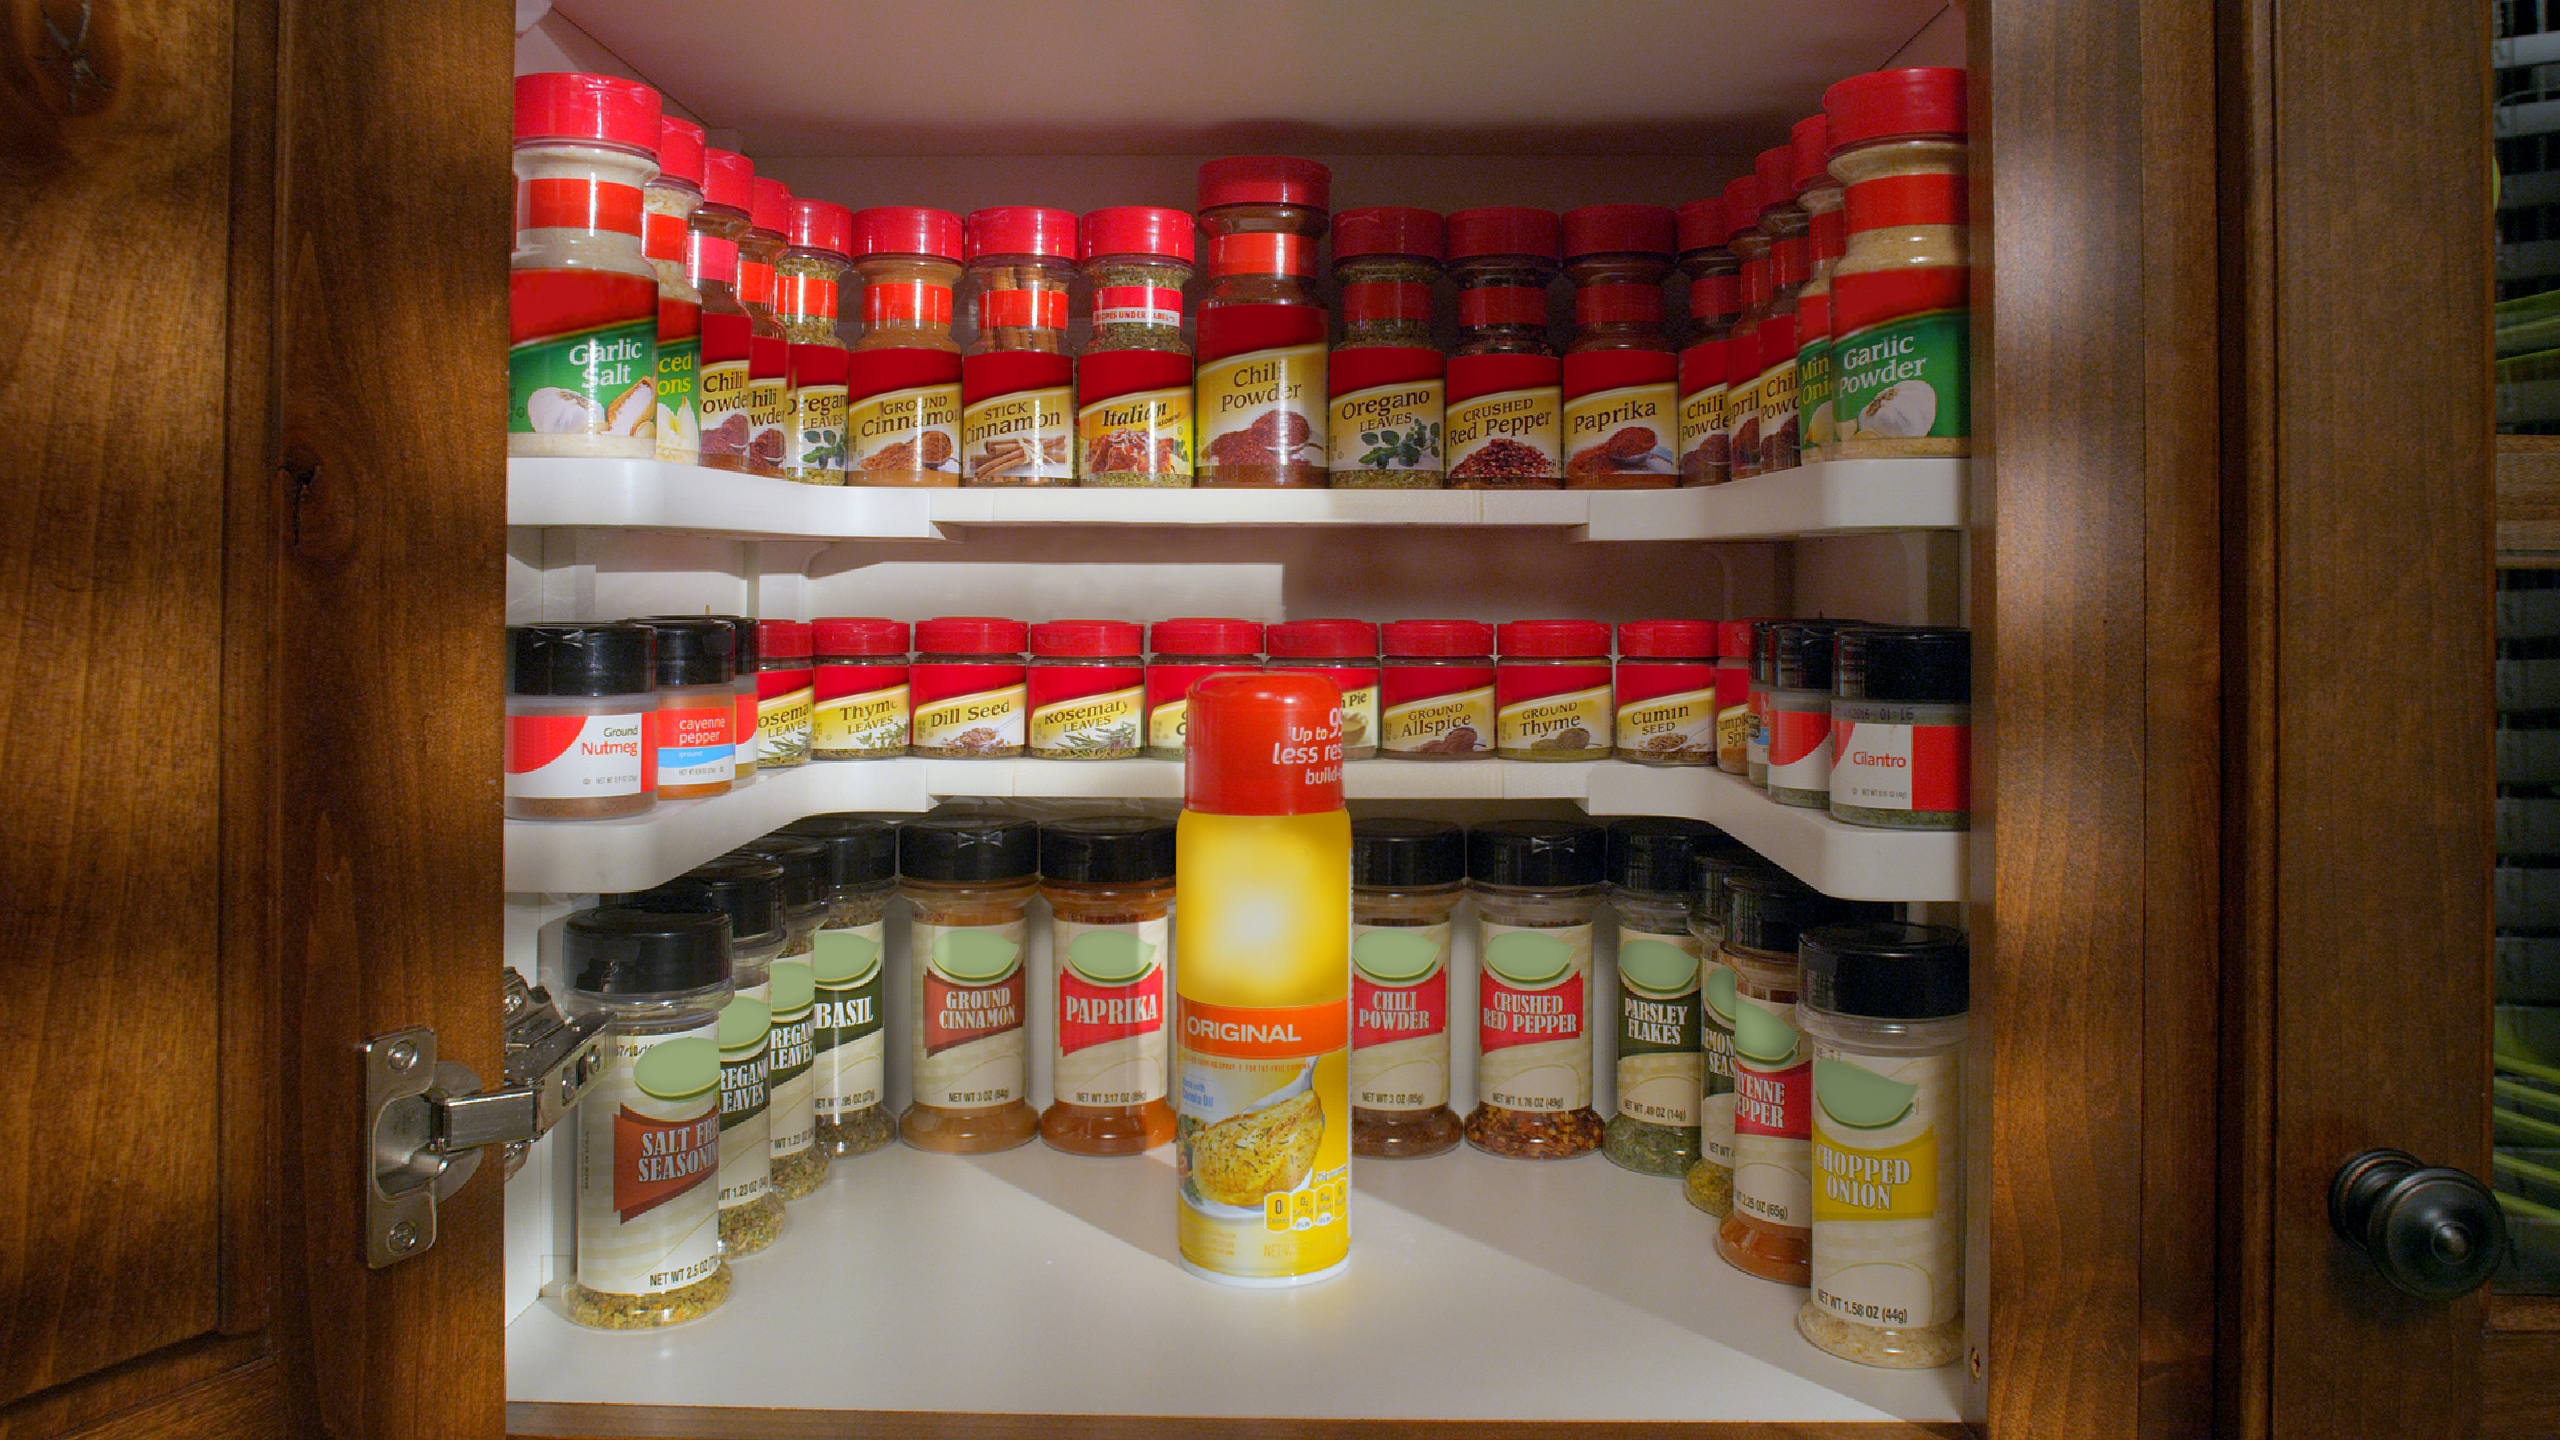 Spicy Shelf Universal Organizer for Cabinets, Spice Jar Organization for Pantry, As Seen on TV - image 4 of 7